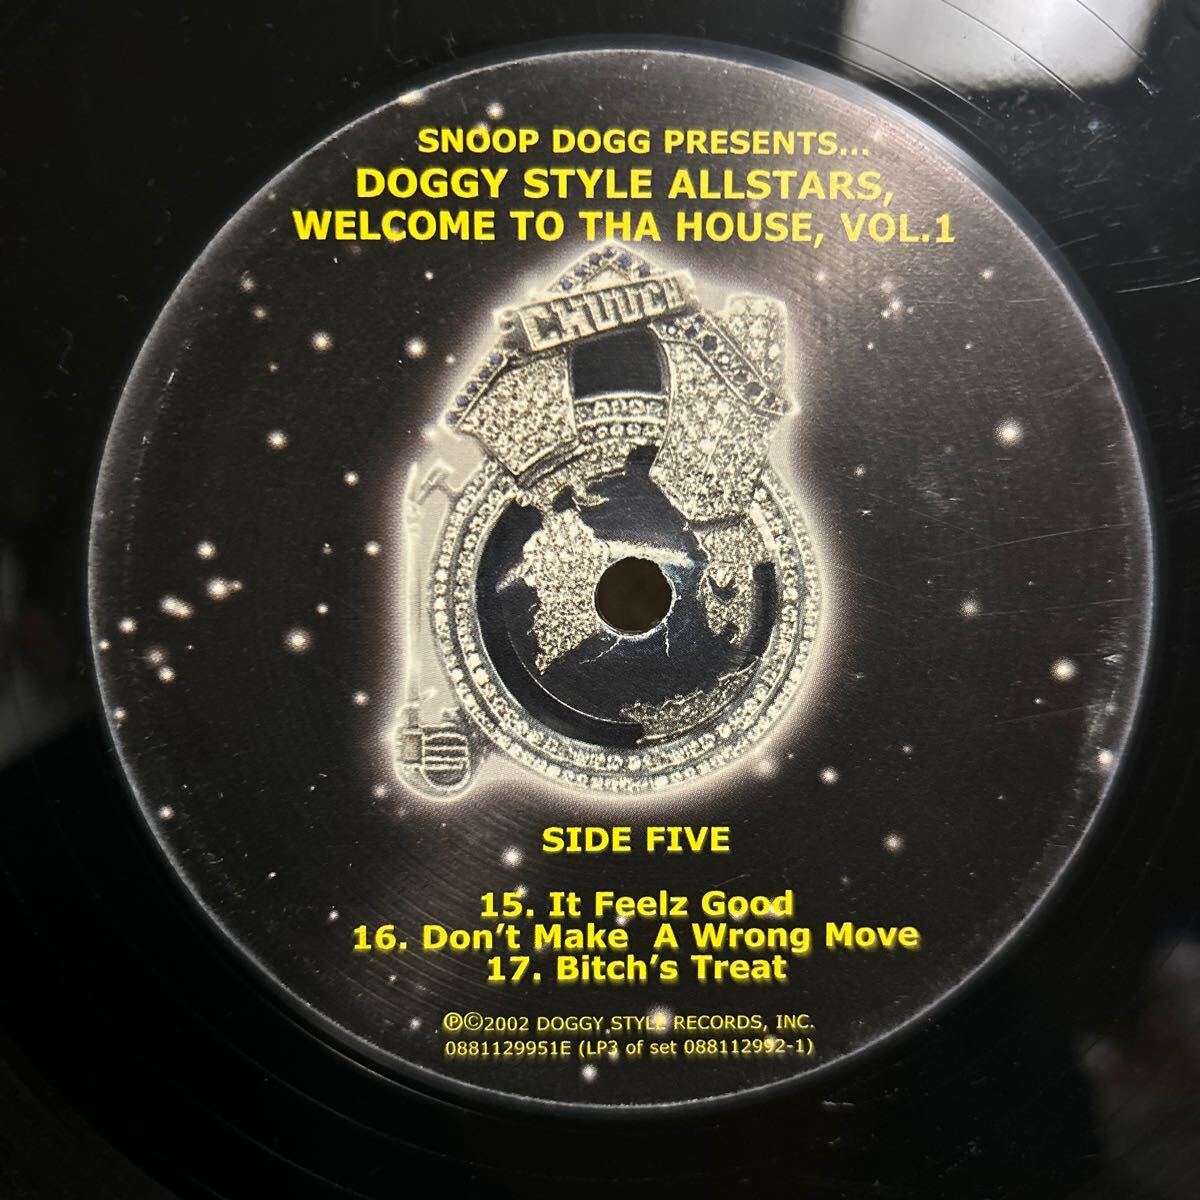 SNOOP DOGG PRESENTS / doggy style allstars / welcome to the house vol.1 / 3LP レコード_画像8